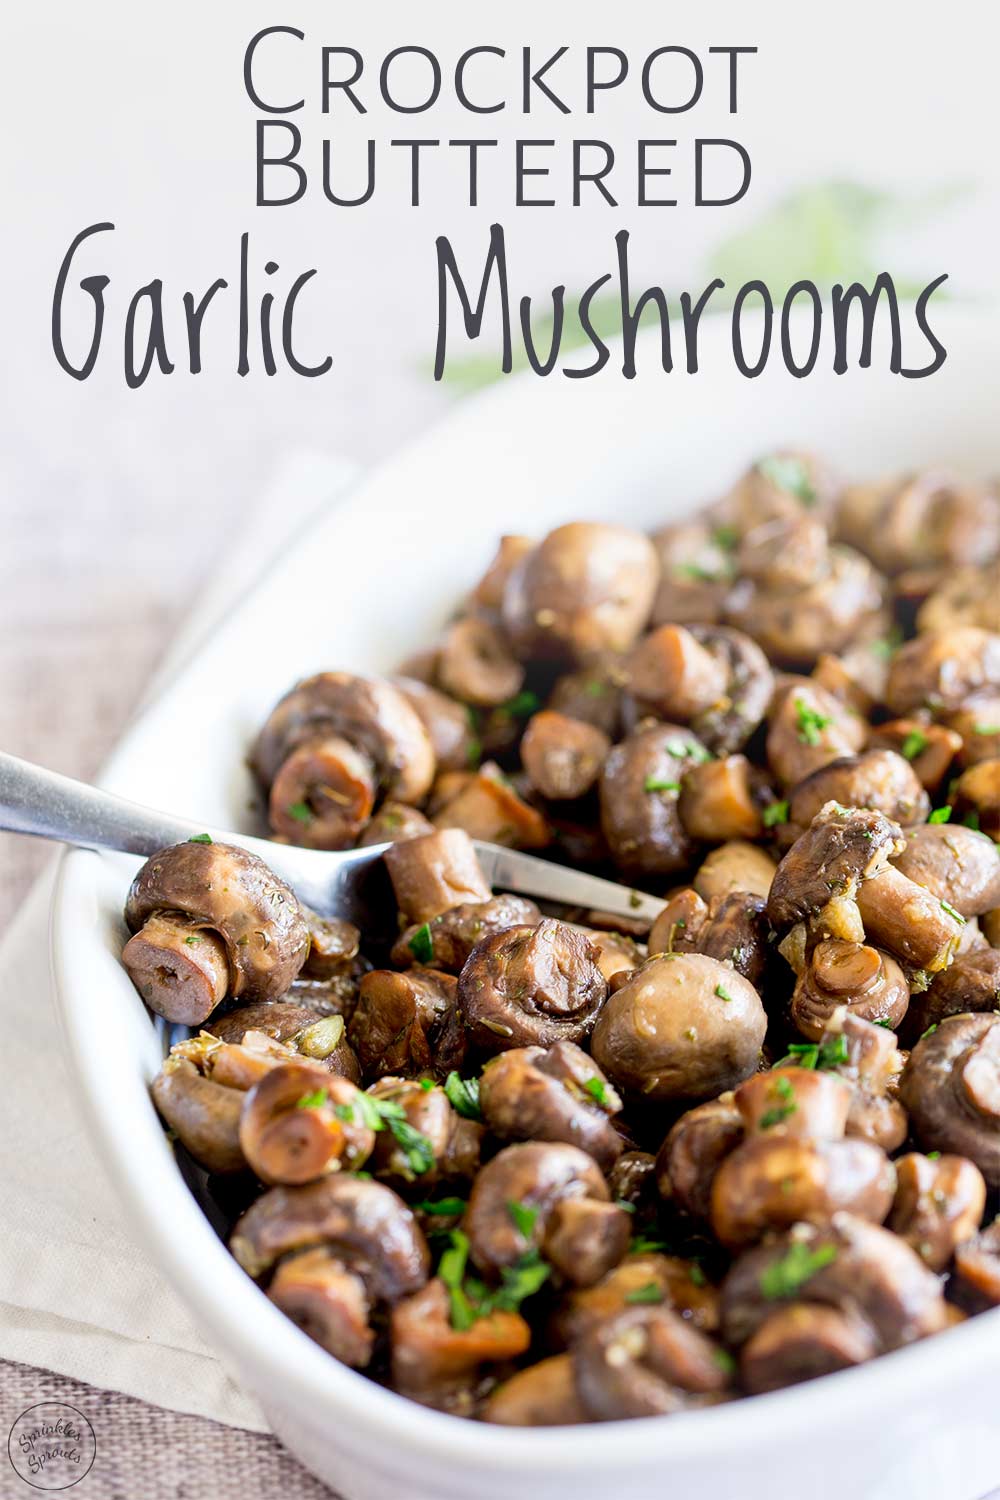 garlic mushrooms in a white serving dish with a metal fork in the dish with text at the top